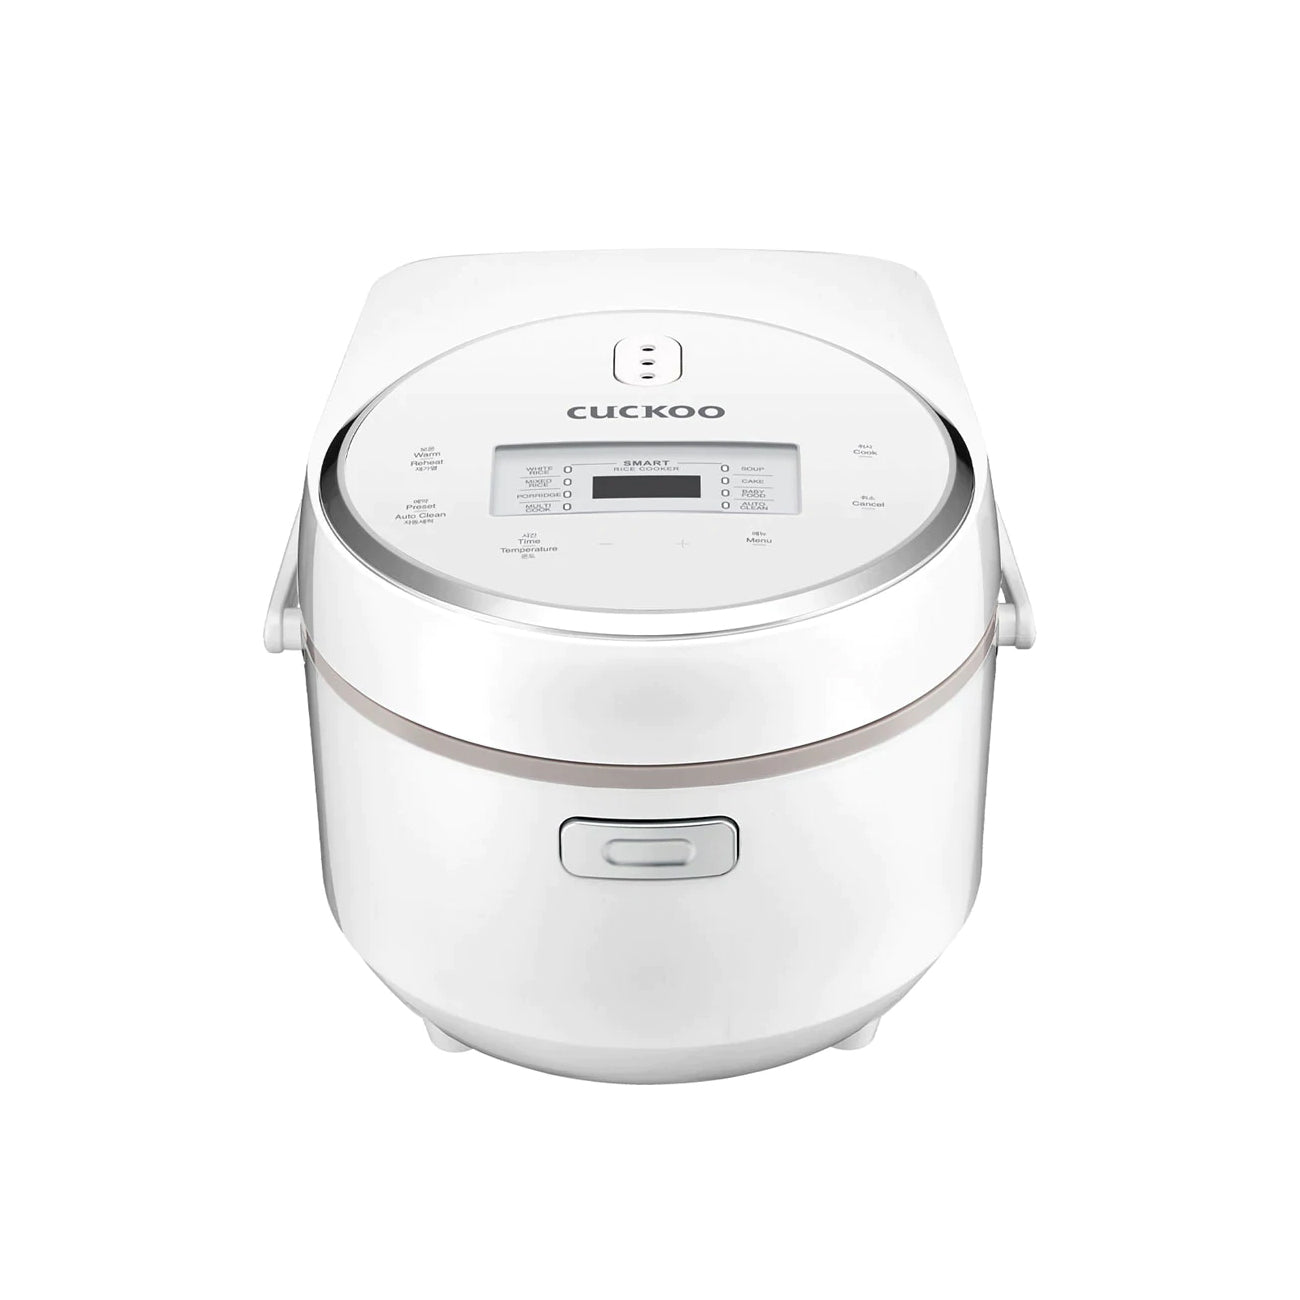 Versatile 8 Cup Rice Cooker with Steamer Basket